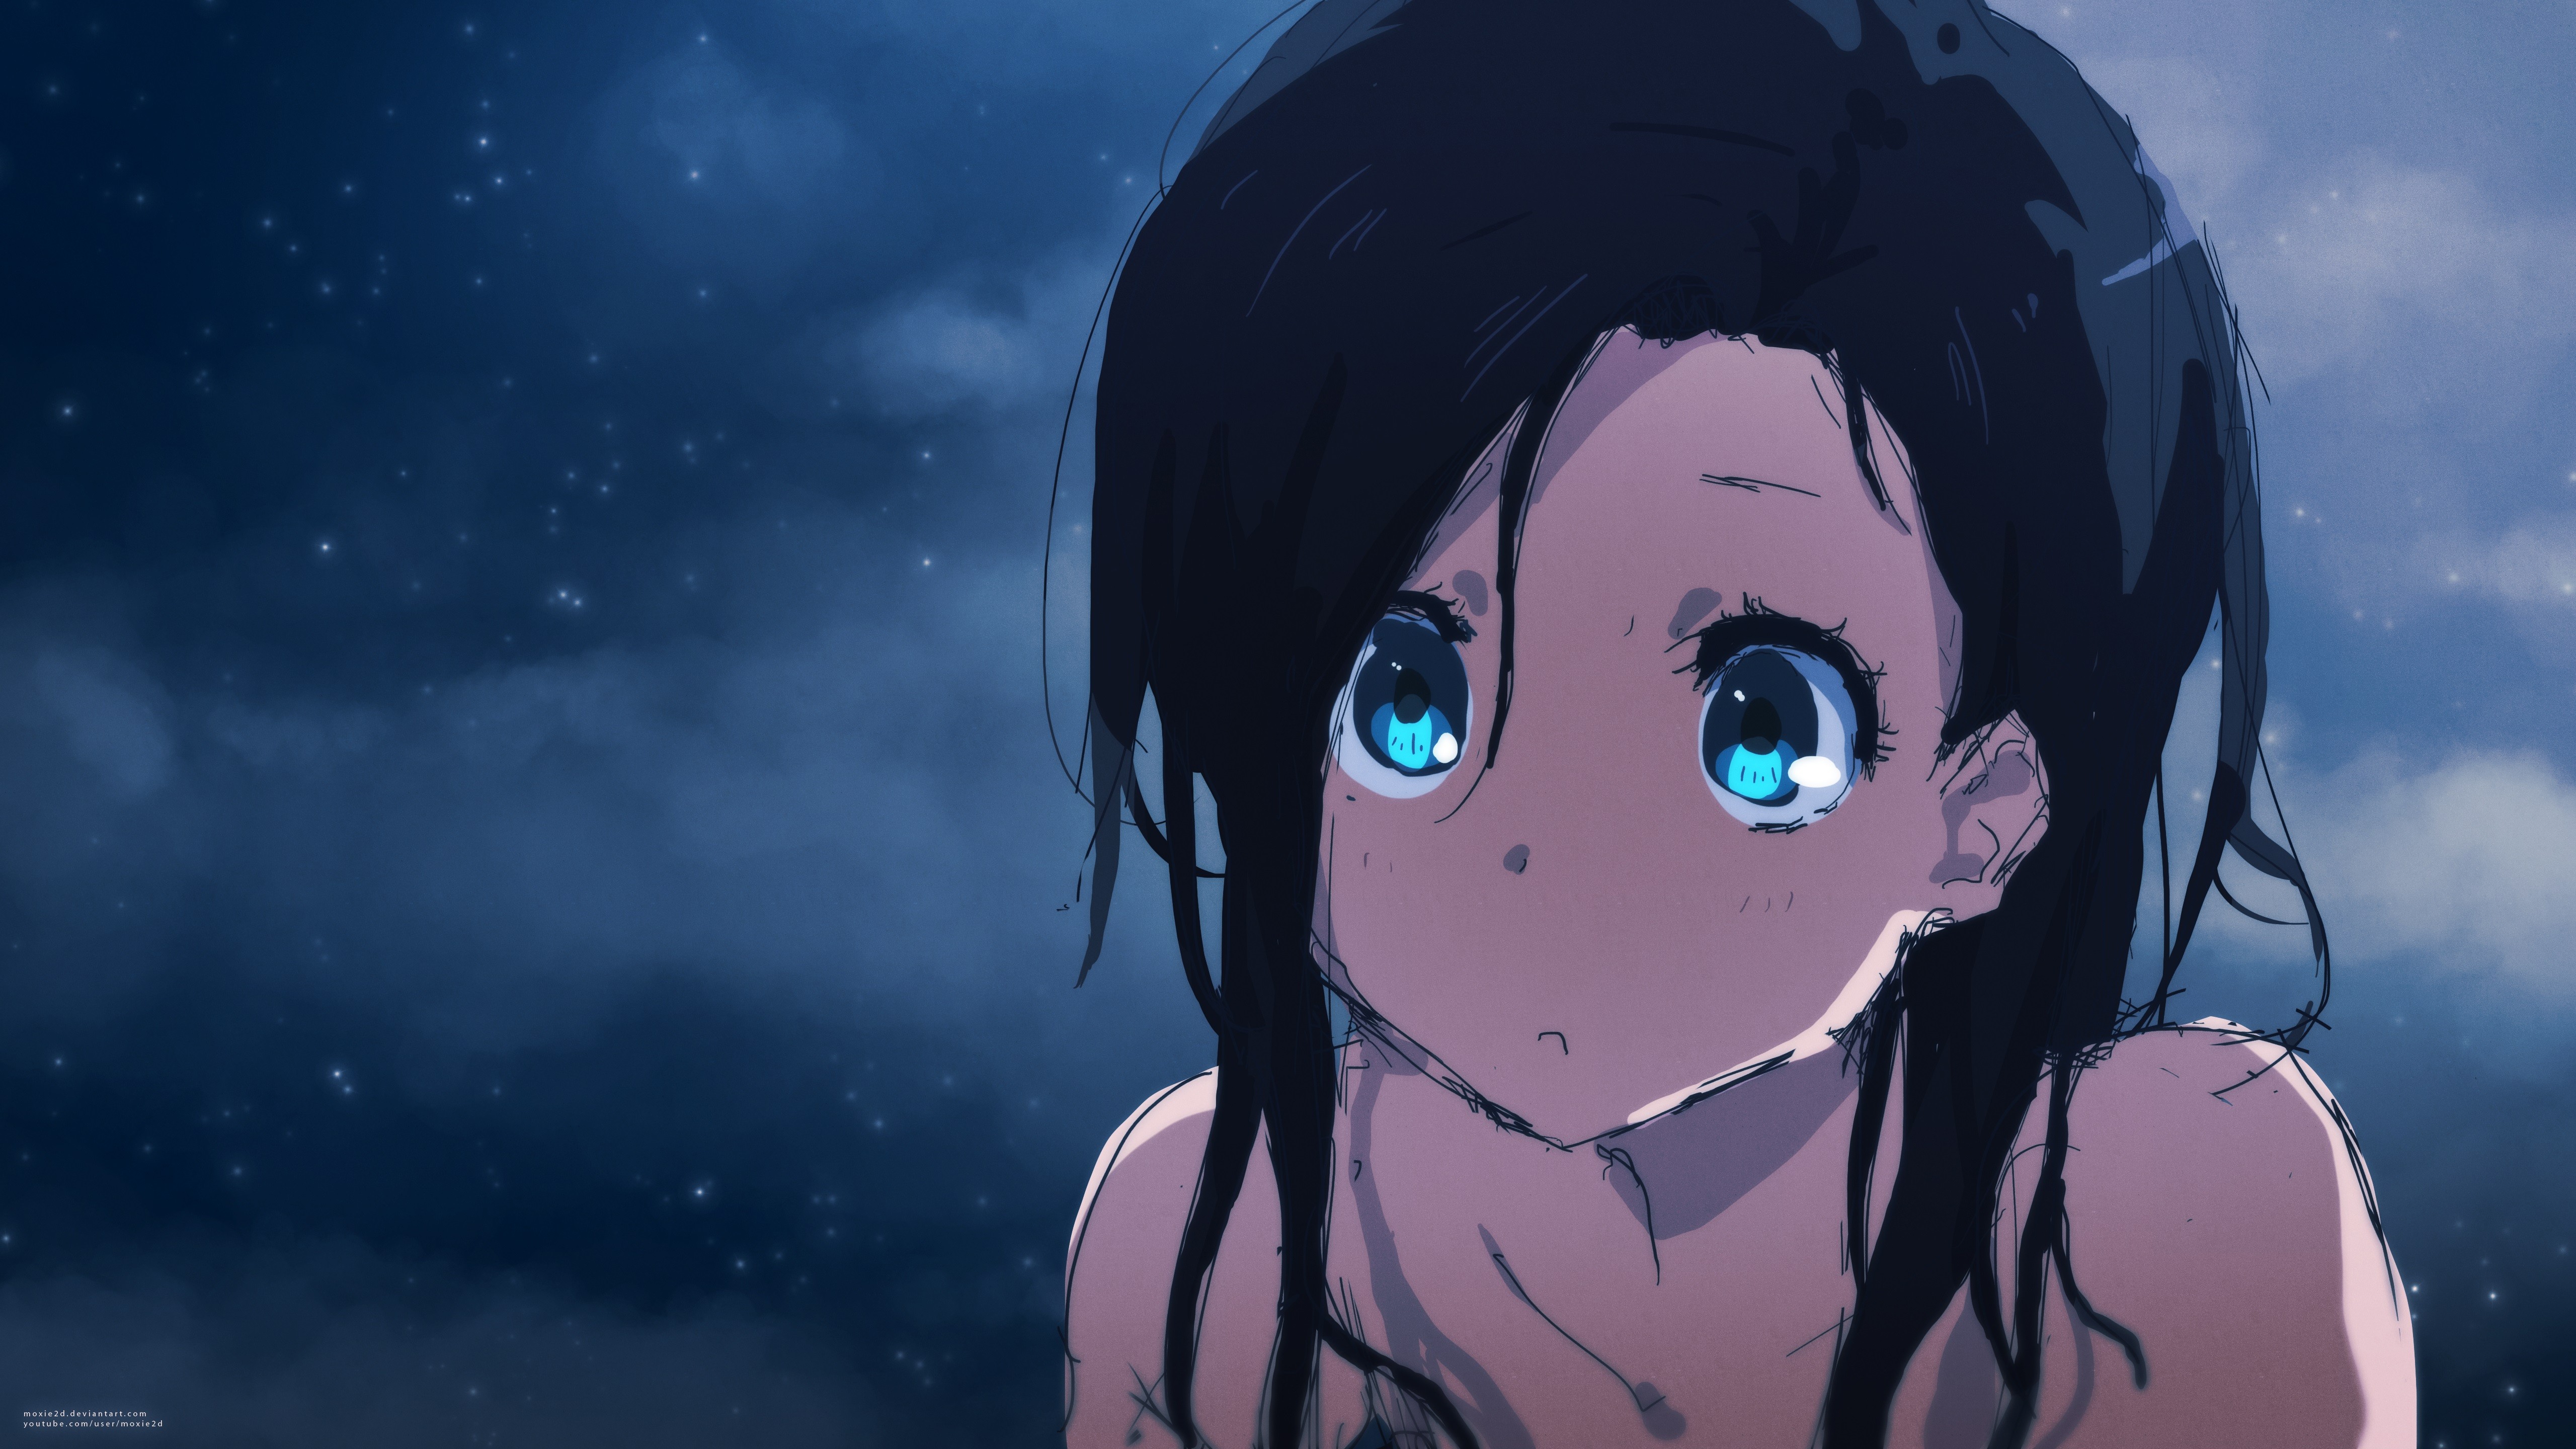 anime girl with short black hair and blue eyes